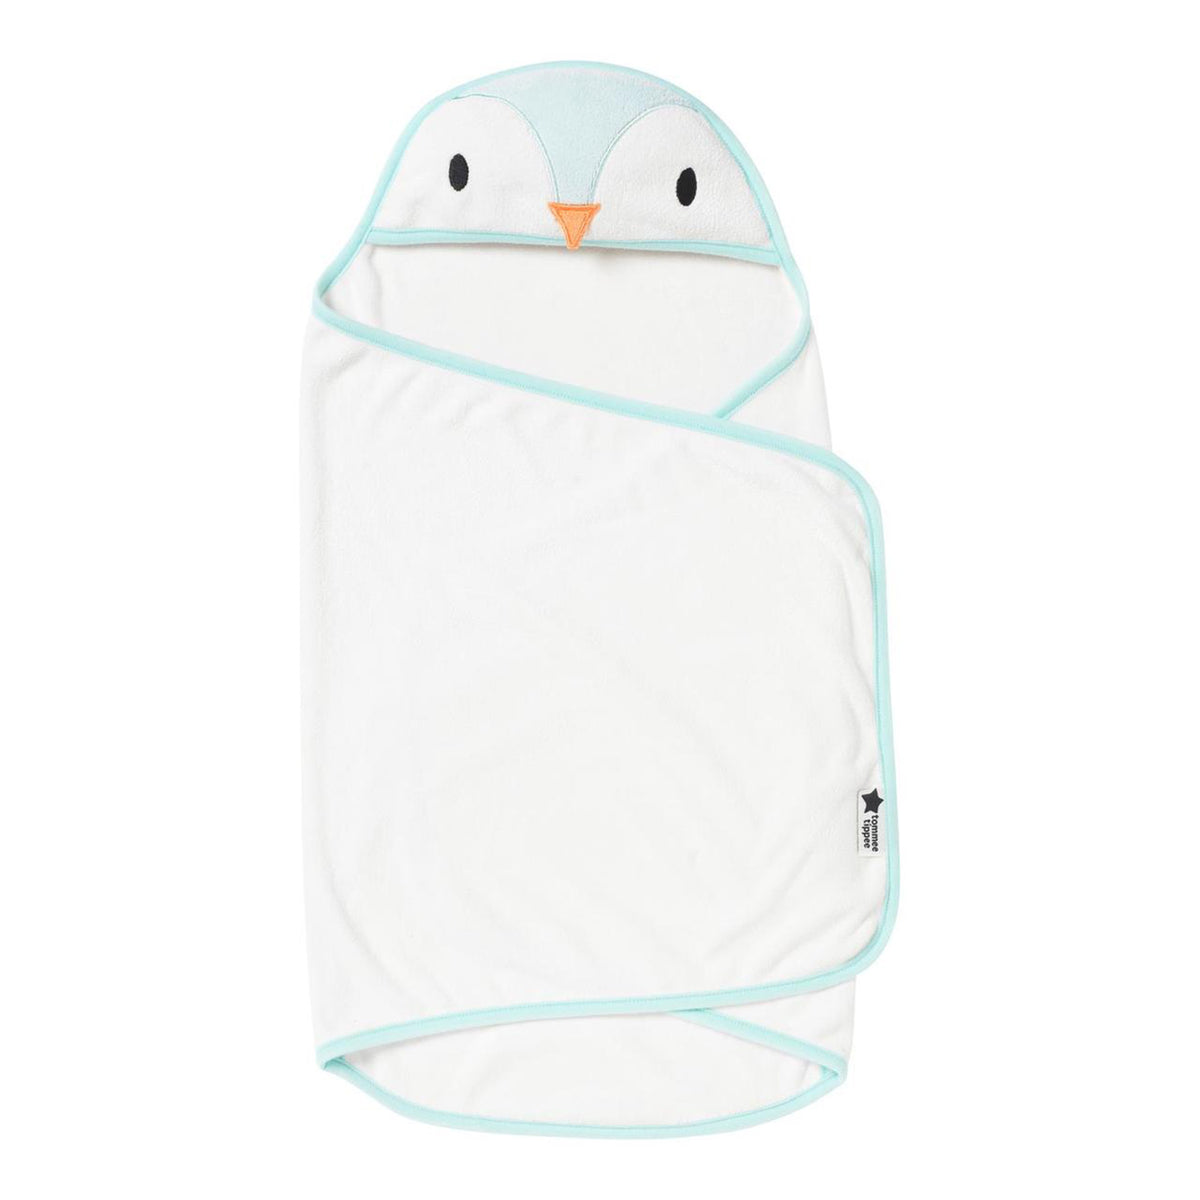 The penguin gro swaddle dry towel